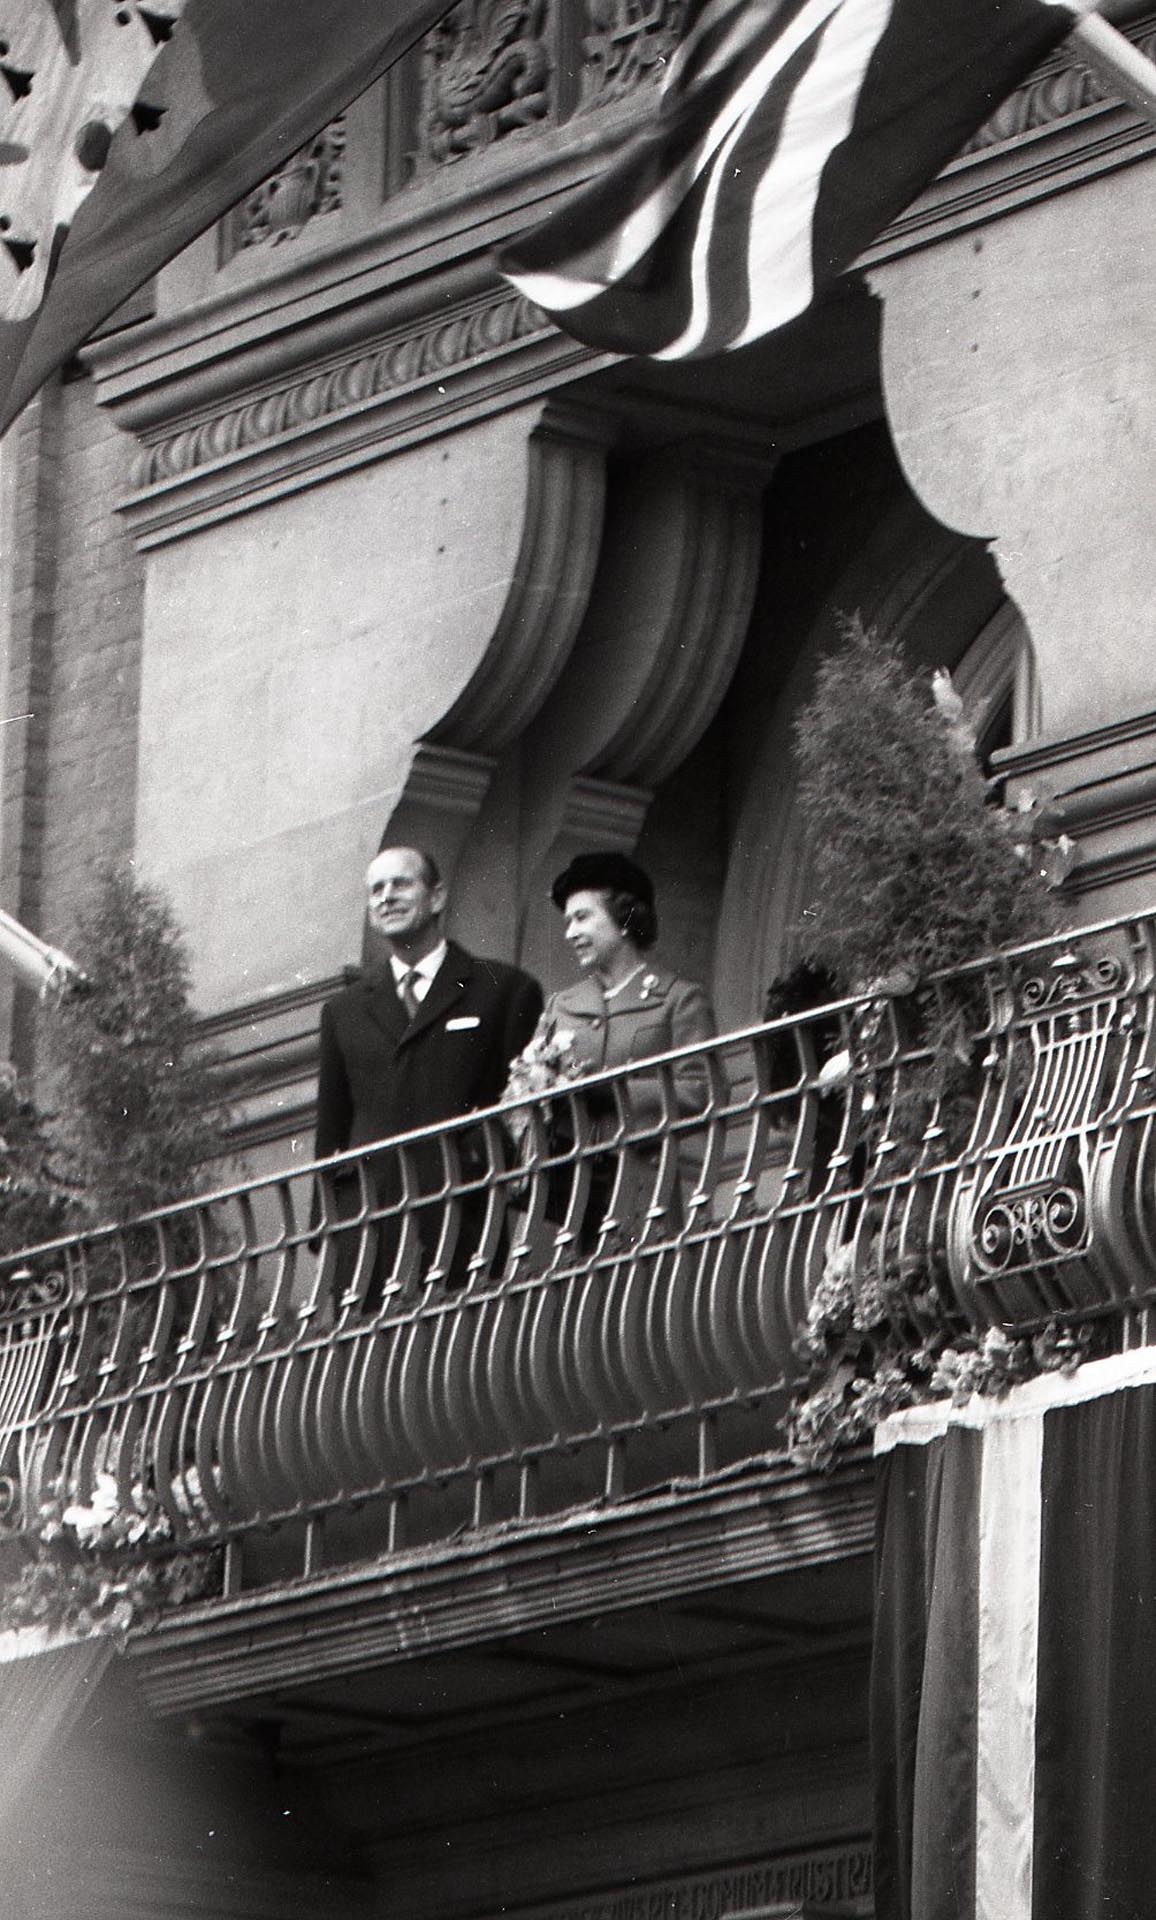 The Queen and Prince Philip stand on a balcony of Leicester’s Town Hall, 1980 - 